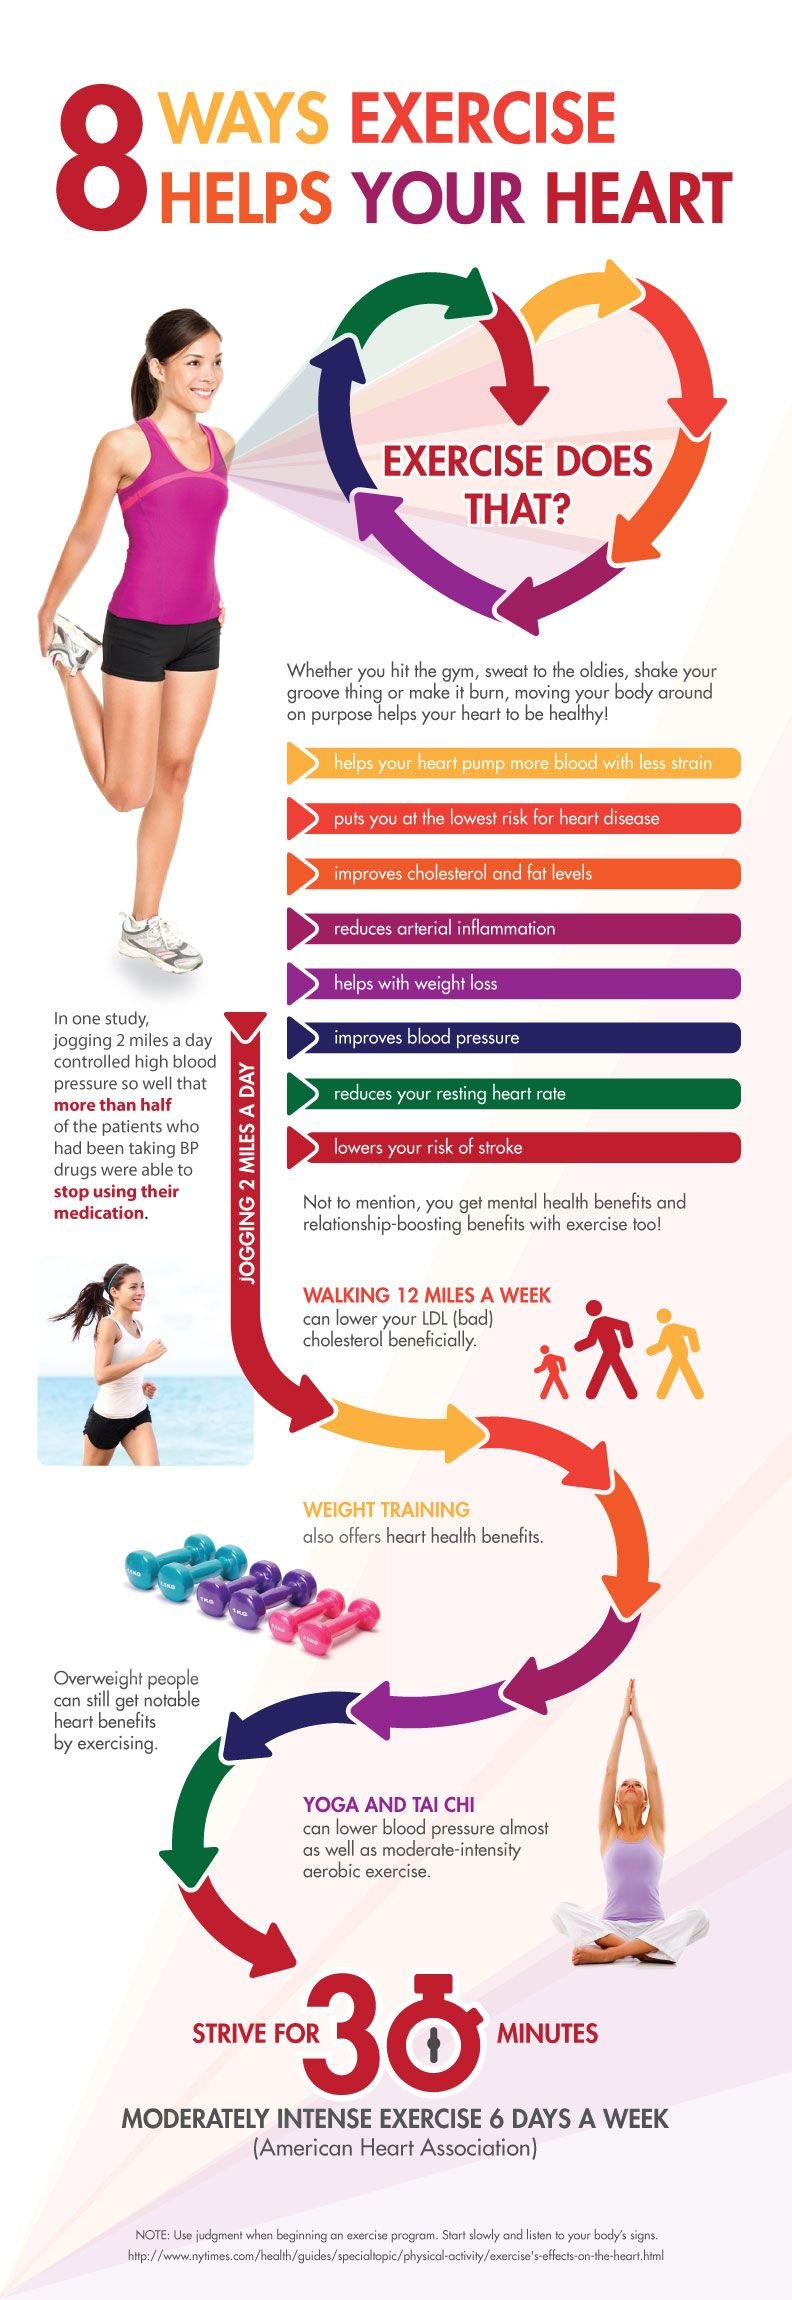 Ways exercise helps your heart